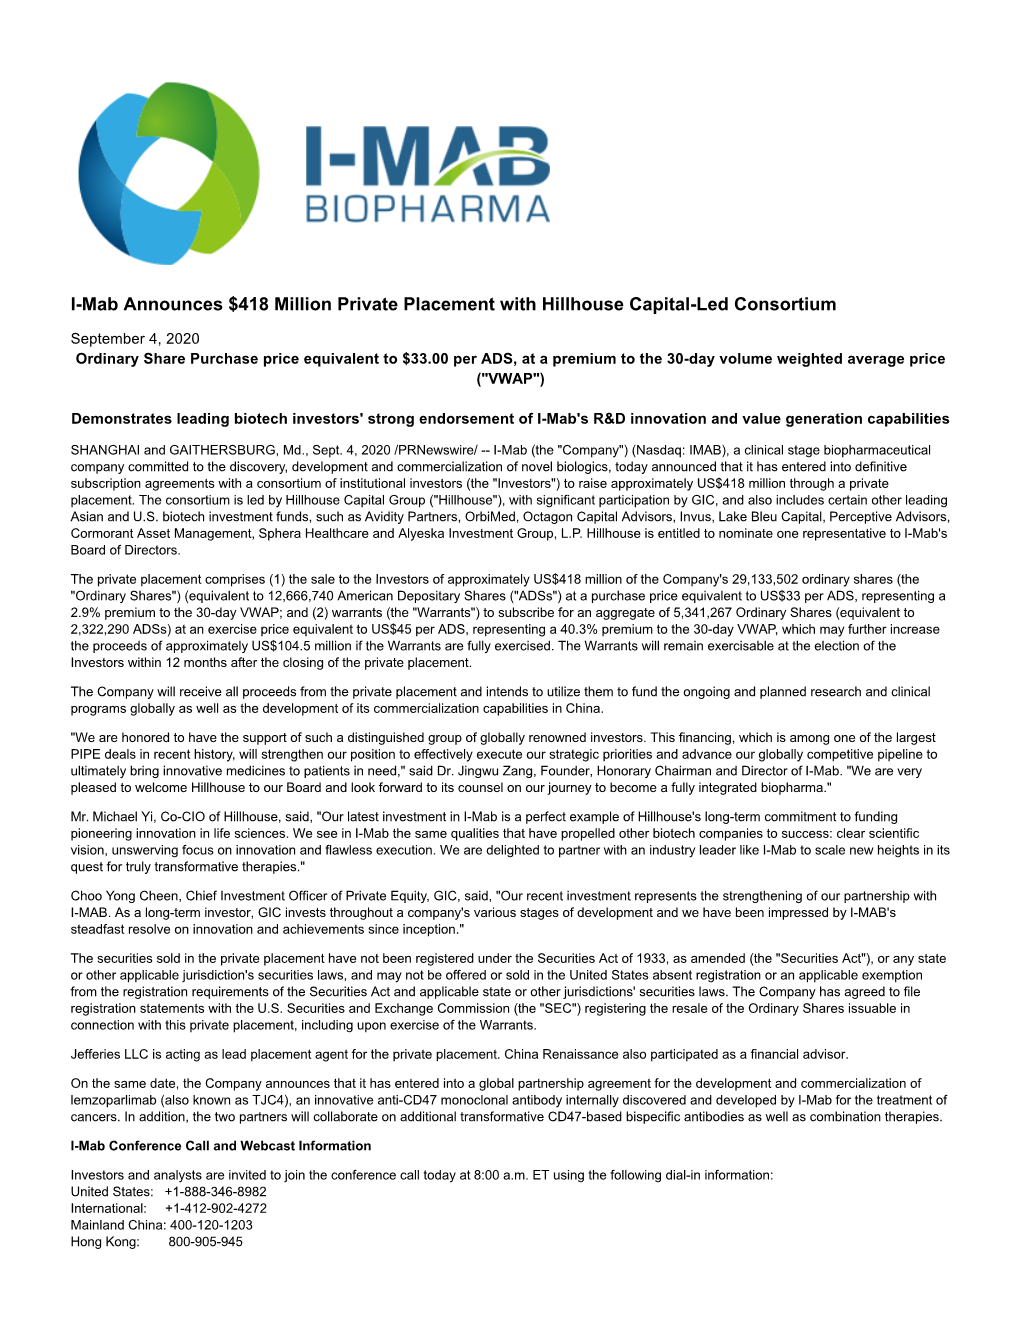 I-Mab Announces $418 Million Private Placement with Hillhouse Capital-Led Consortium